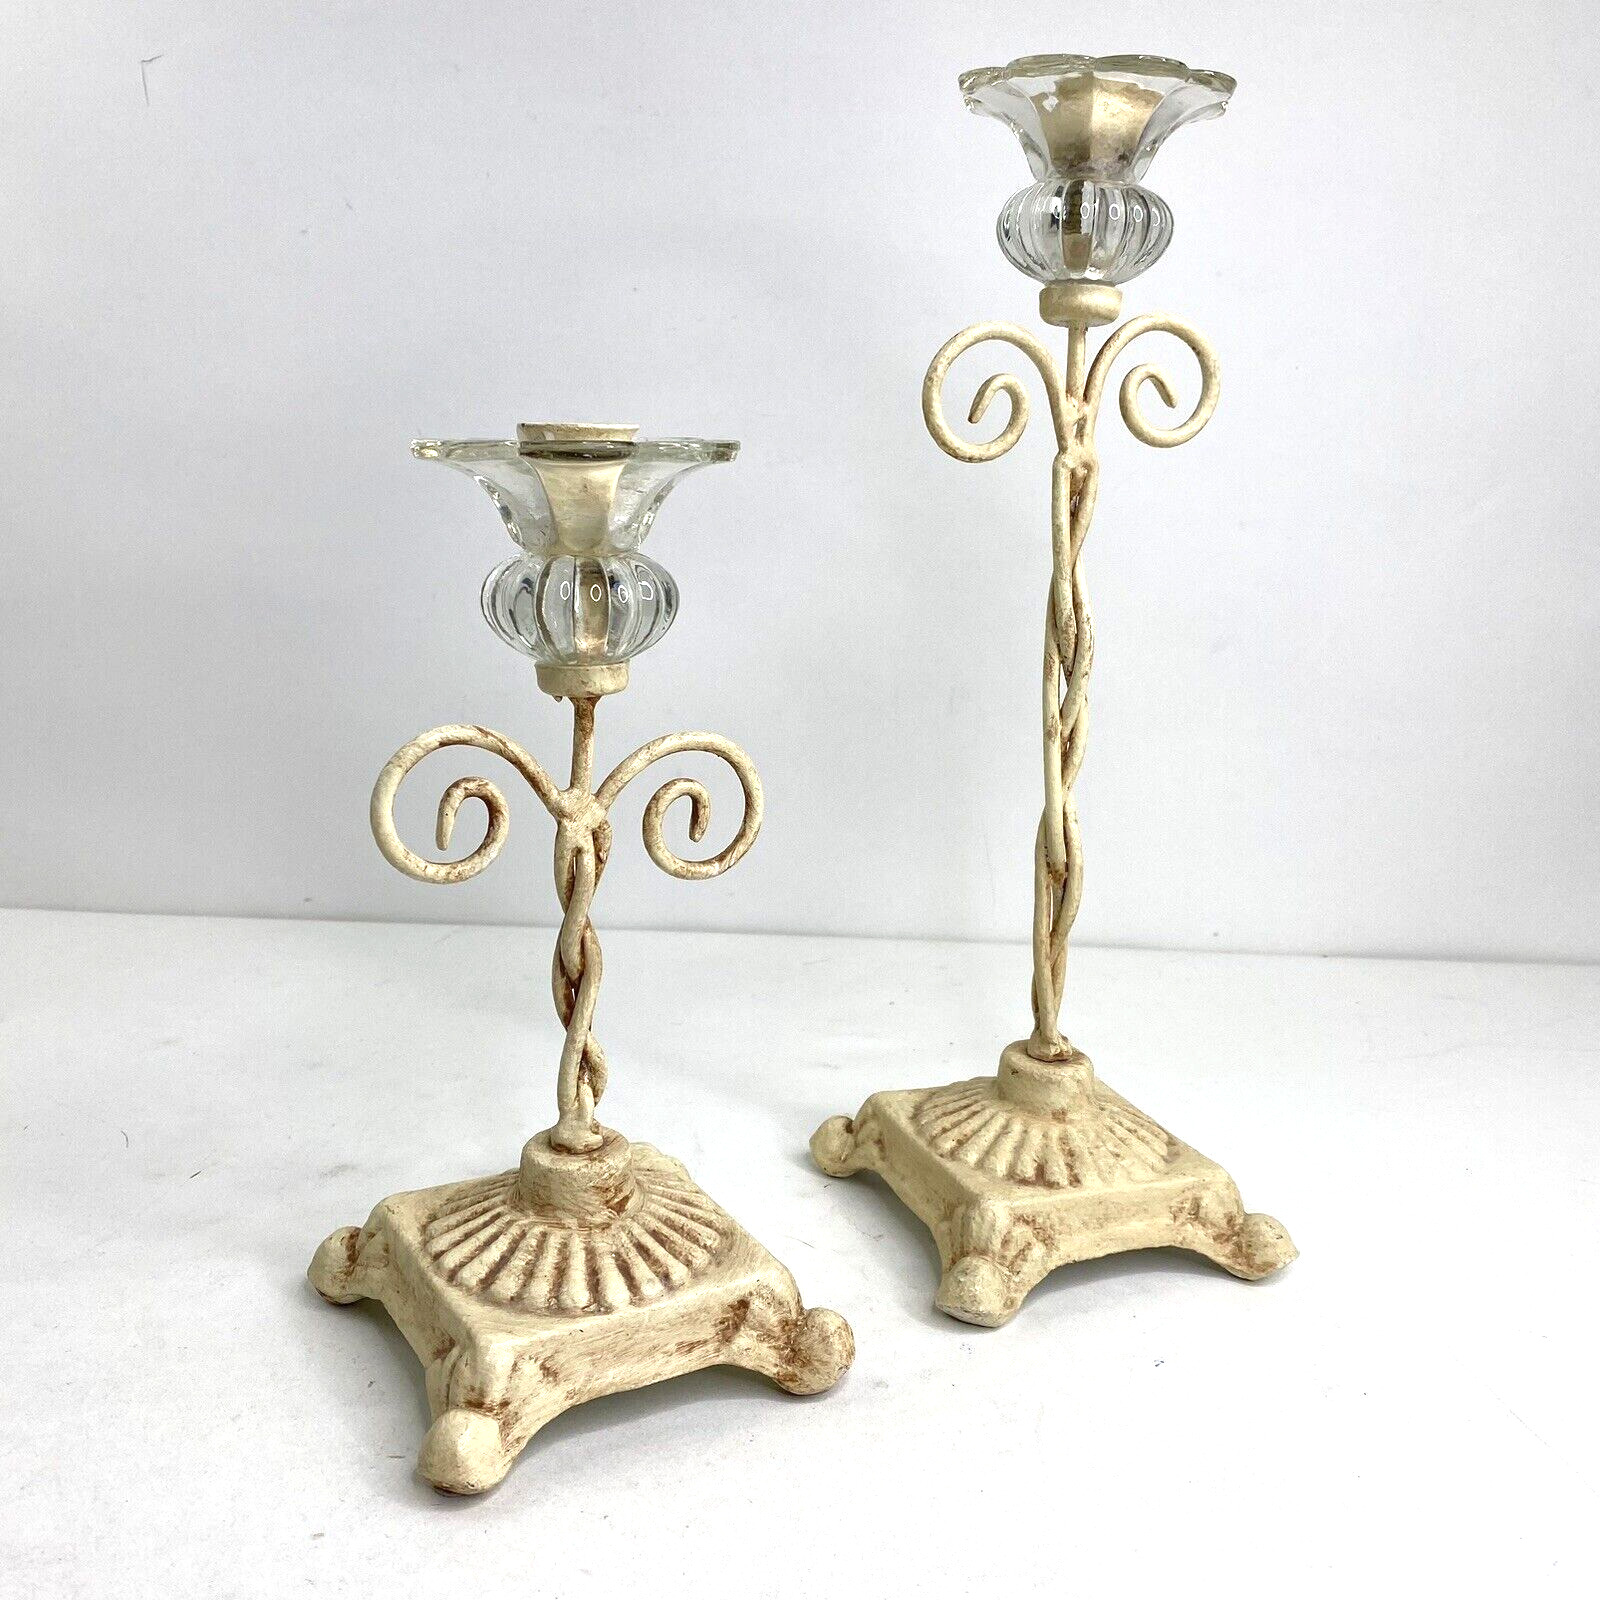 VTG Distressed Candle Holders Set of 2 Heavy Wrought Iron Off White For Tapers